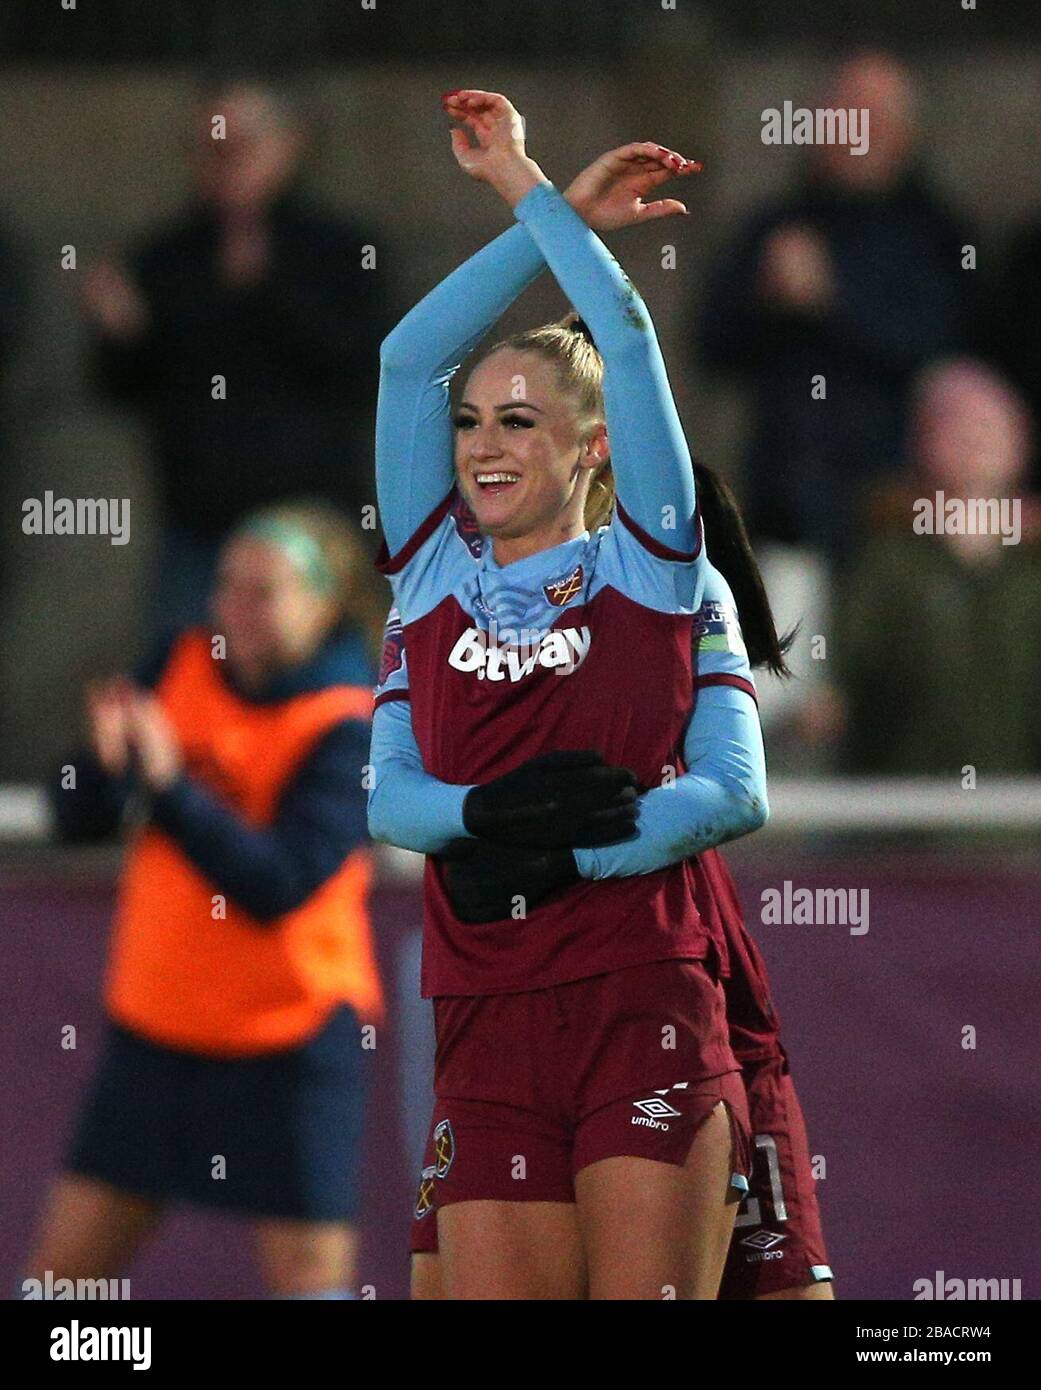 West Ham United's Alisha Lehmann celebrates after scoring her side's second goal of the game Stock Photo